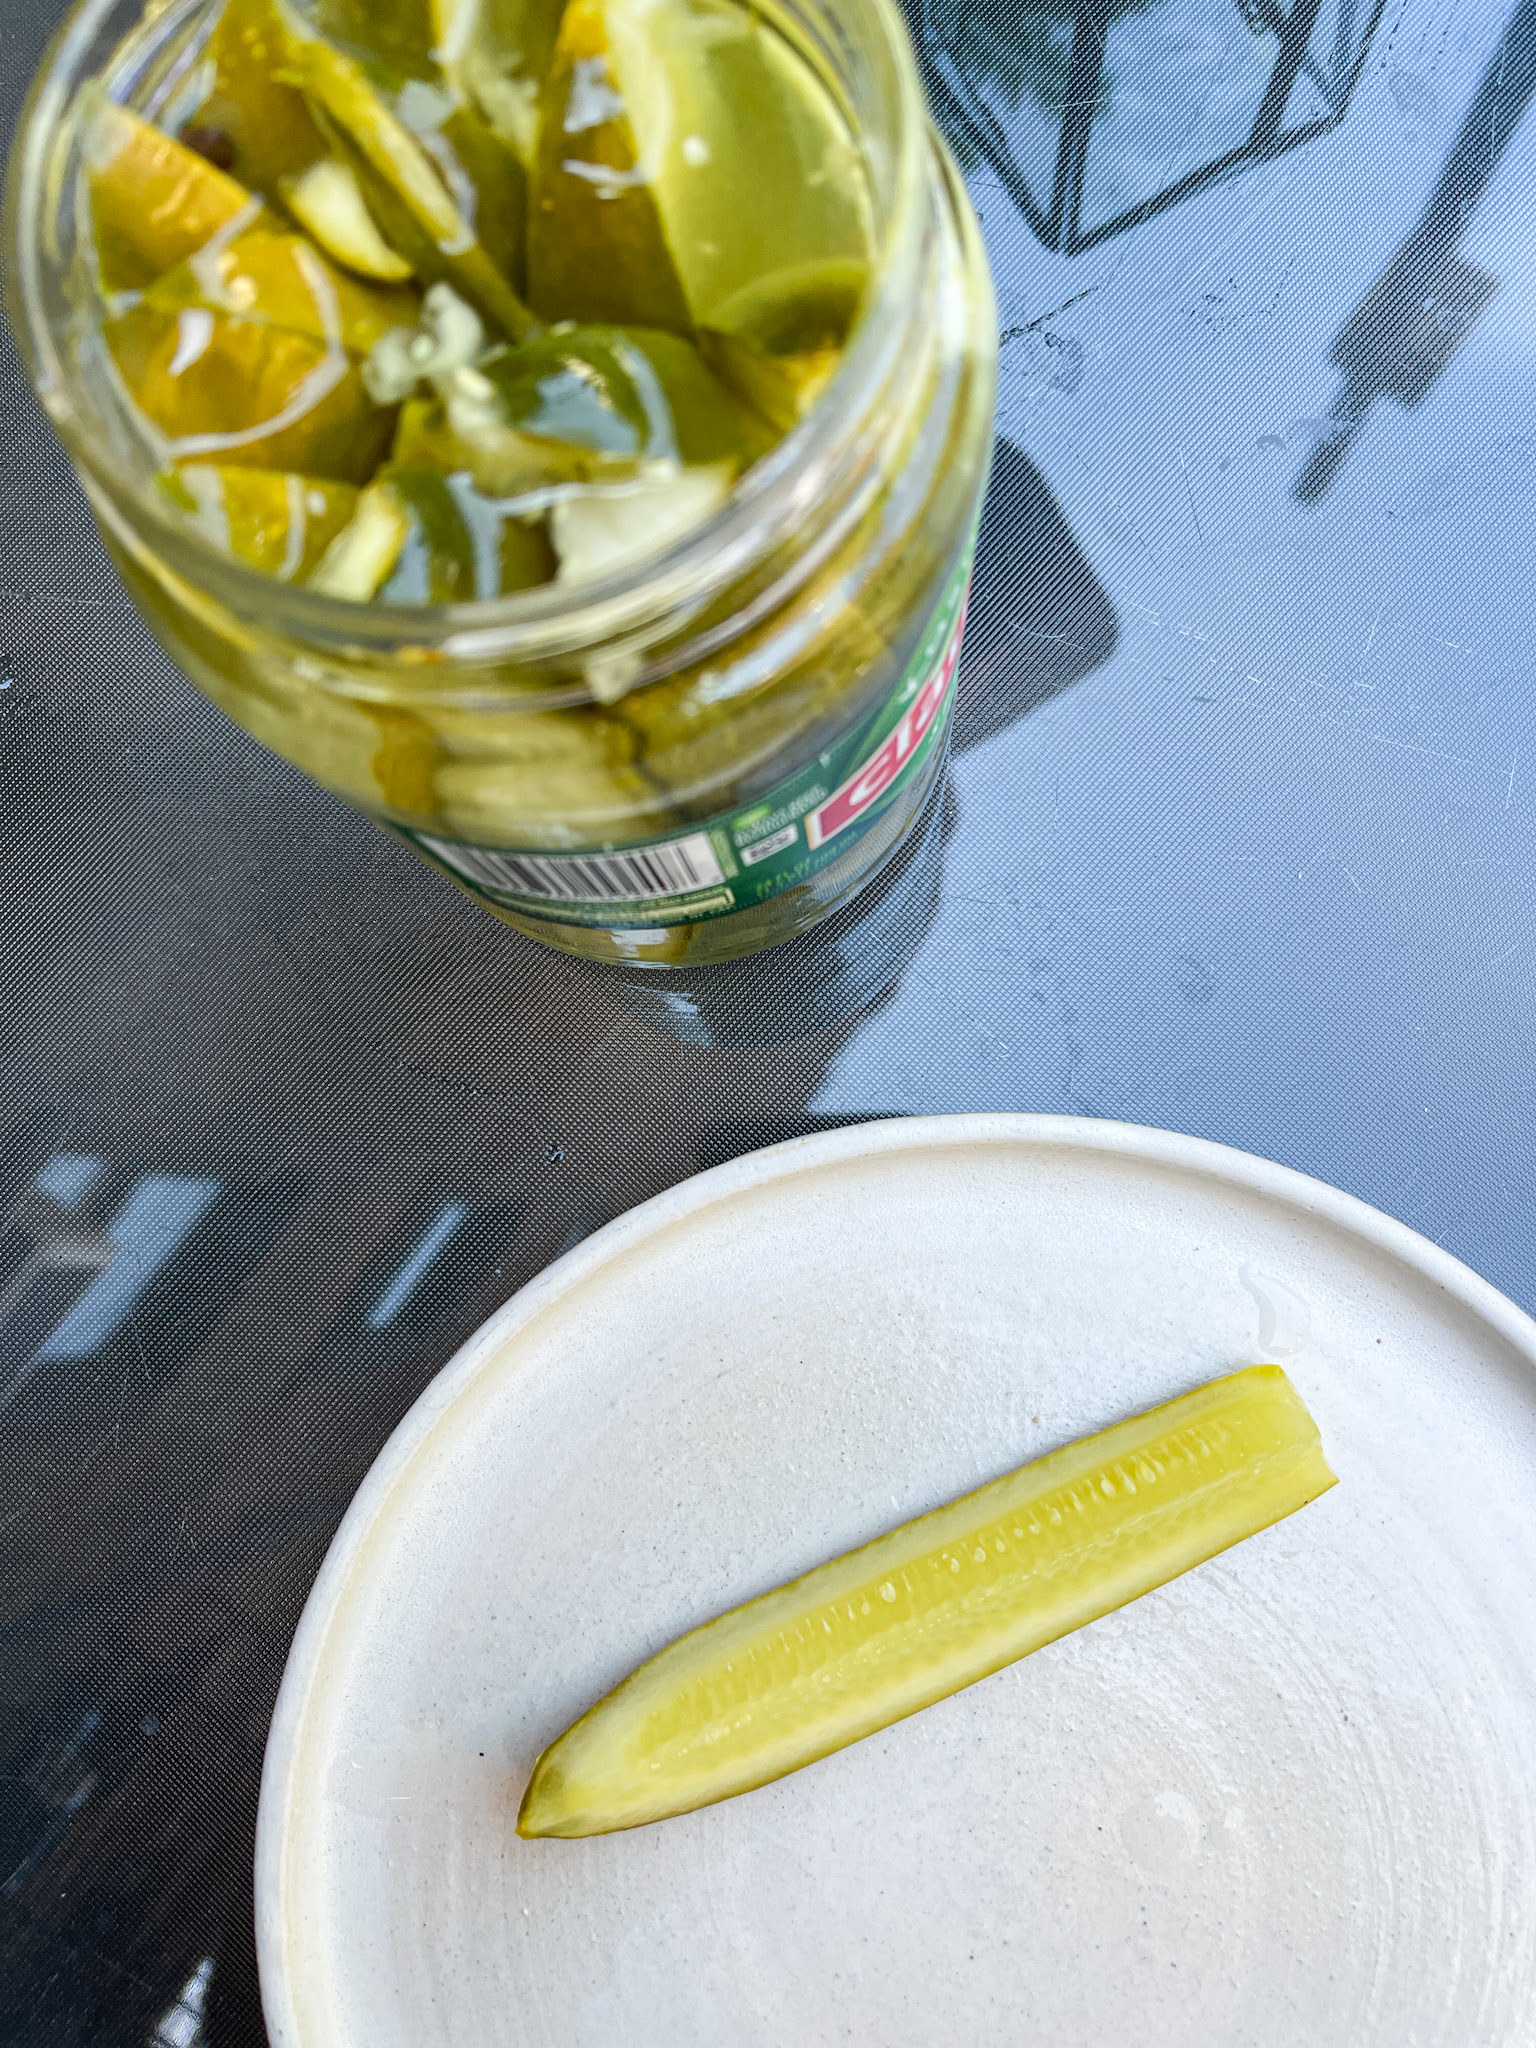 Top view of an open pickle jar and a single pickle slice on a plate on a glass tabletop